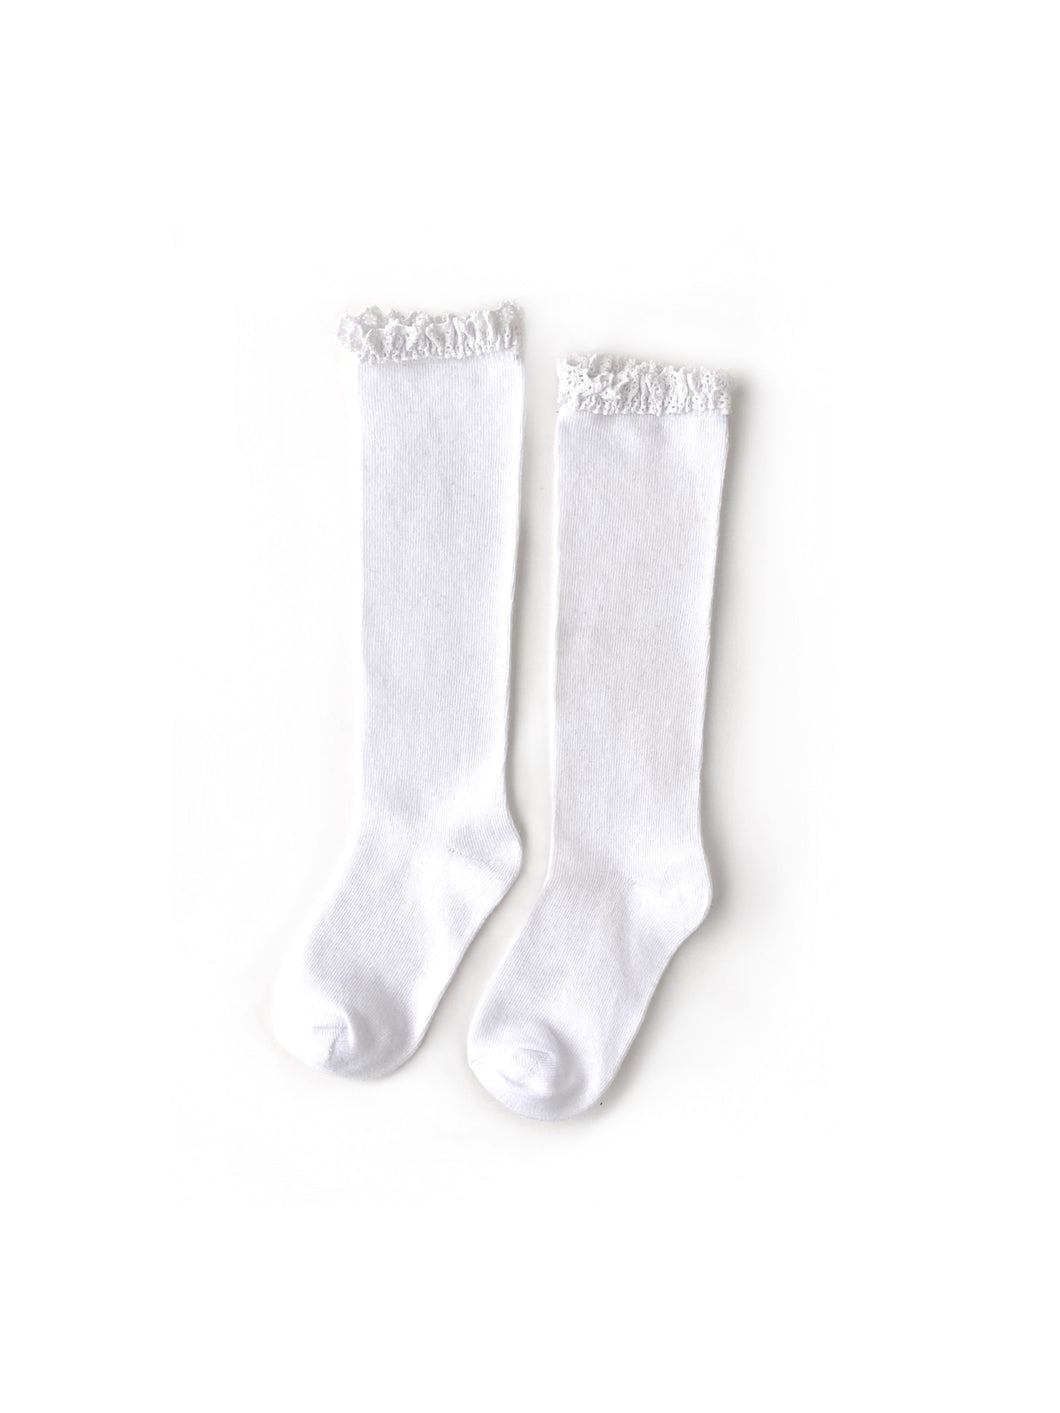 Little Stocking Co. White Lace Top Knee Highs